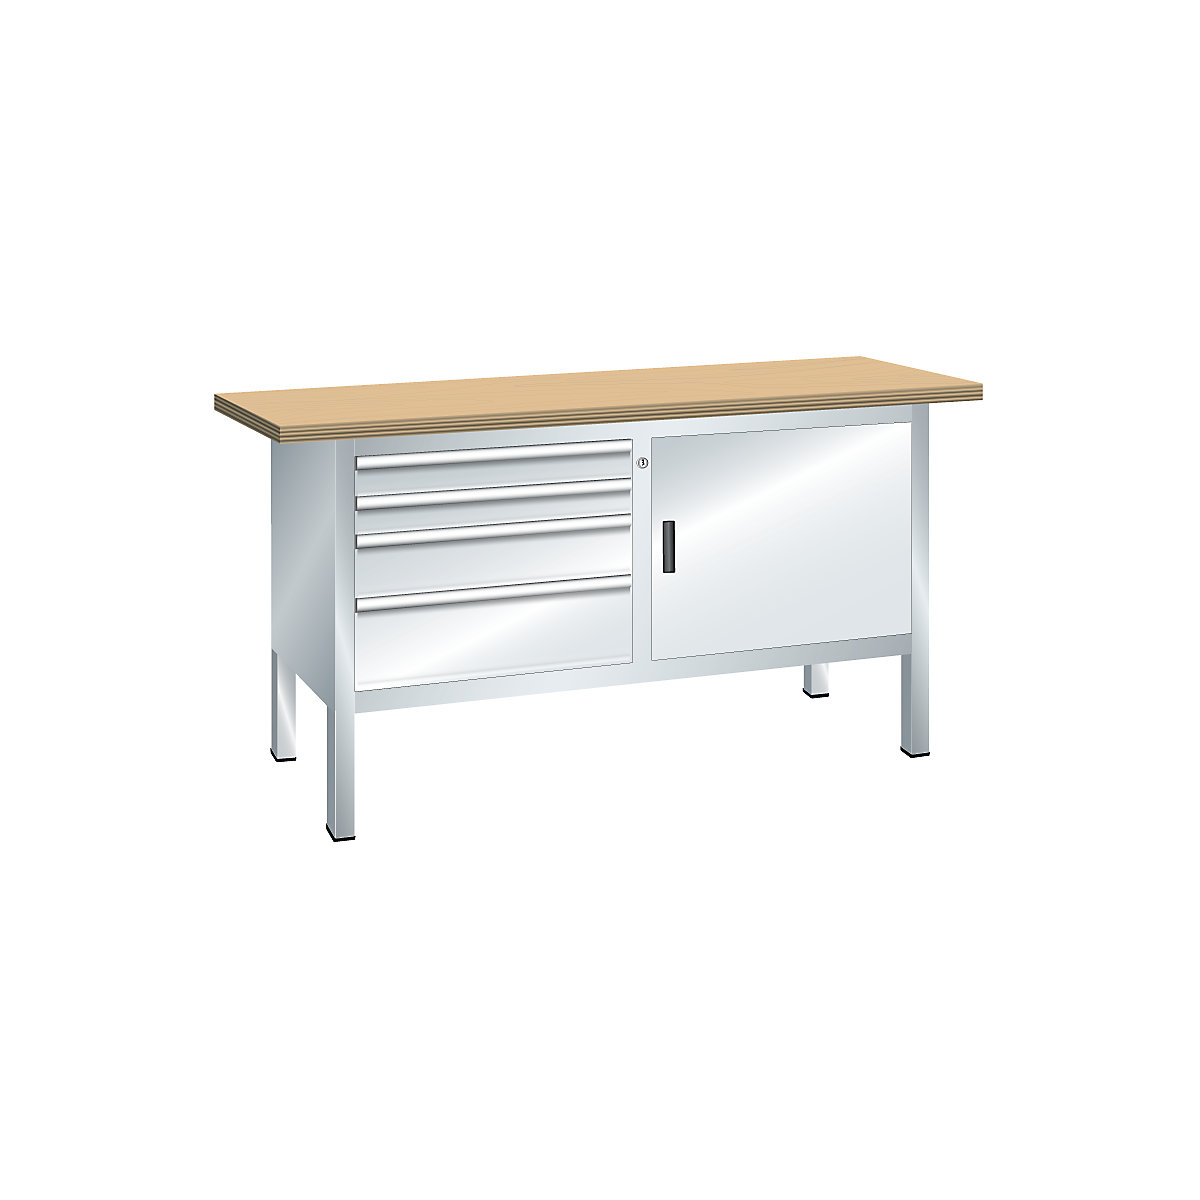 Workbench with solid beech top, frame construction – LISTA, width 1500 mm, 4 drawers, 1 door, body light grey, front light grey-2